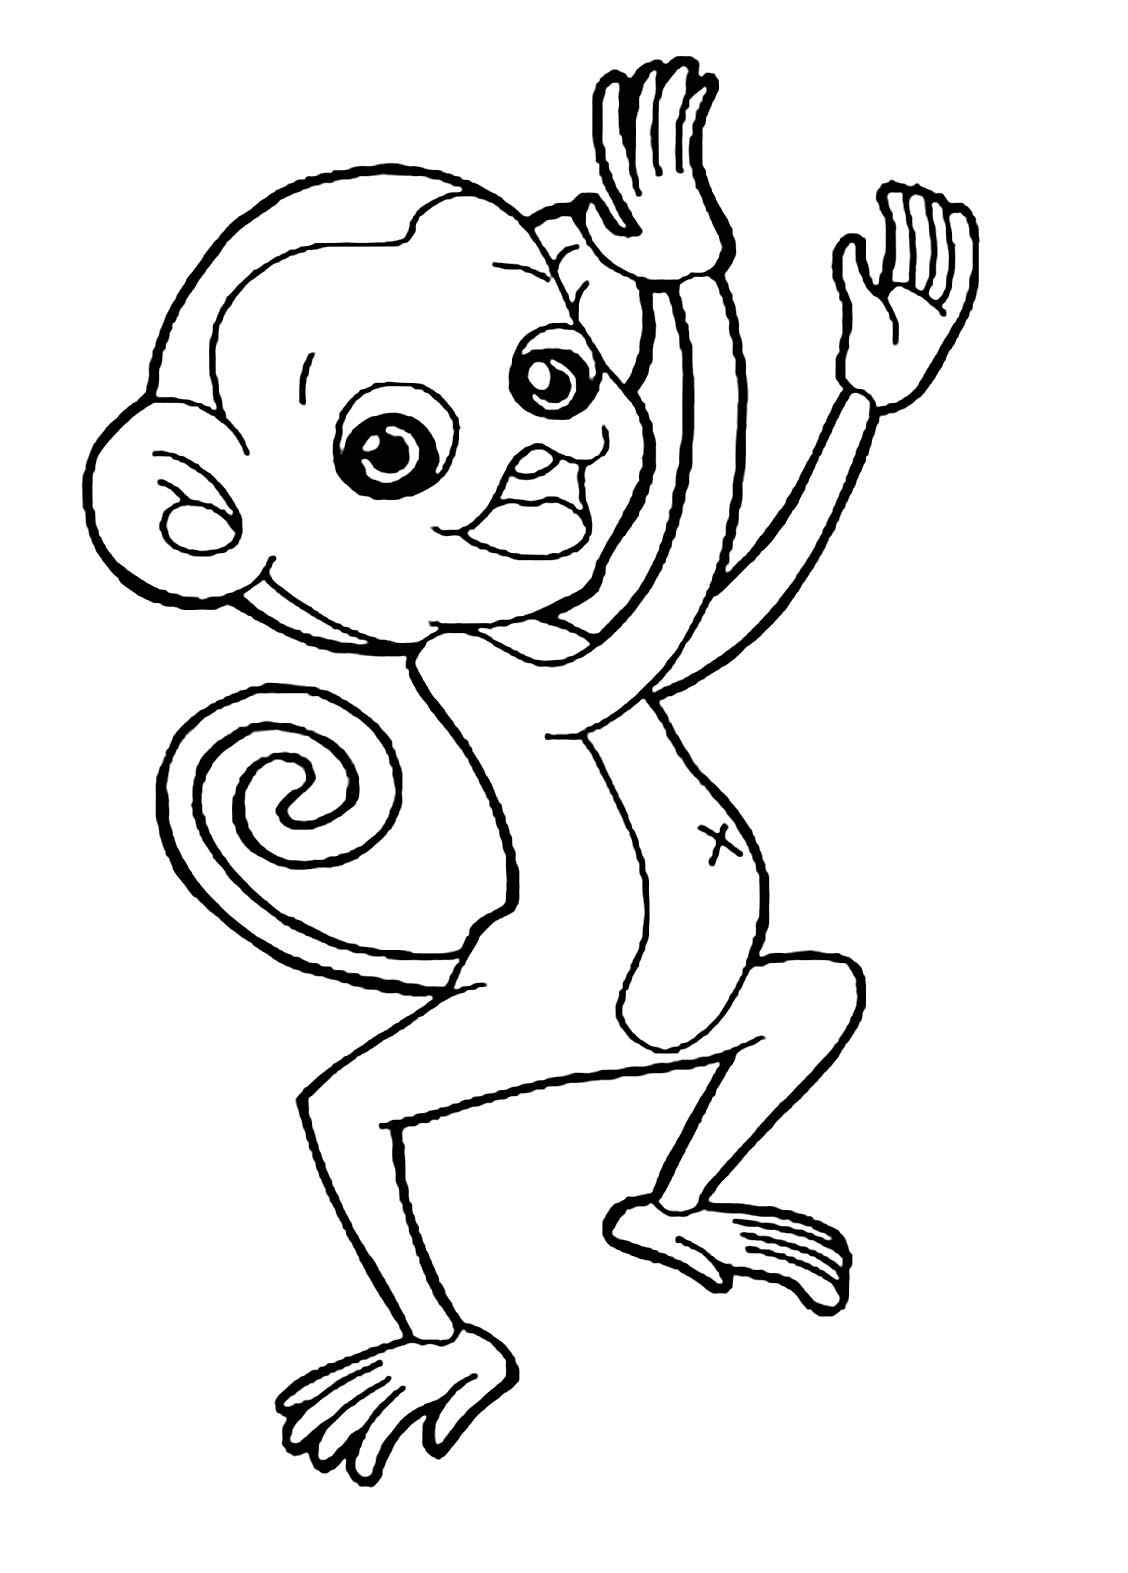 New Simple Monkeys Coloring Page